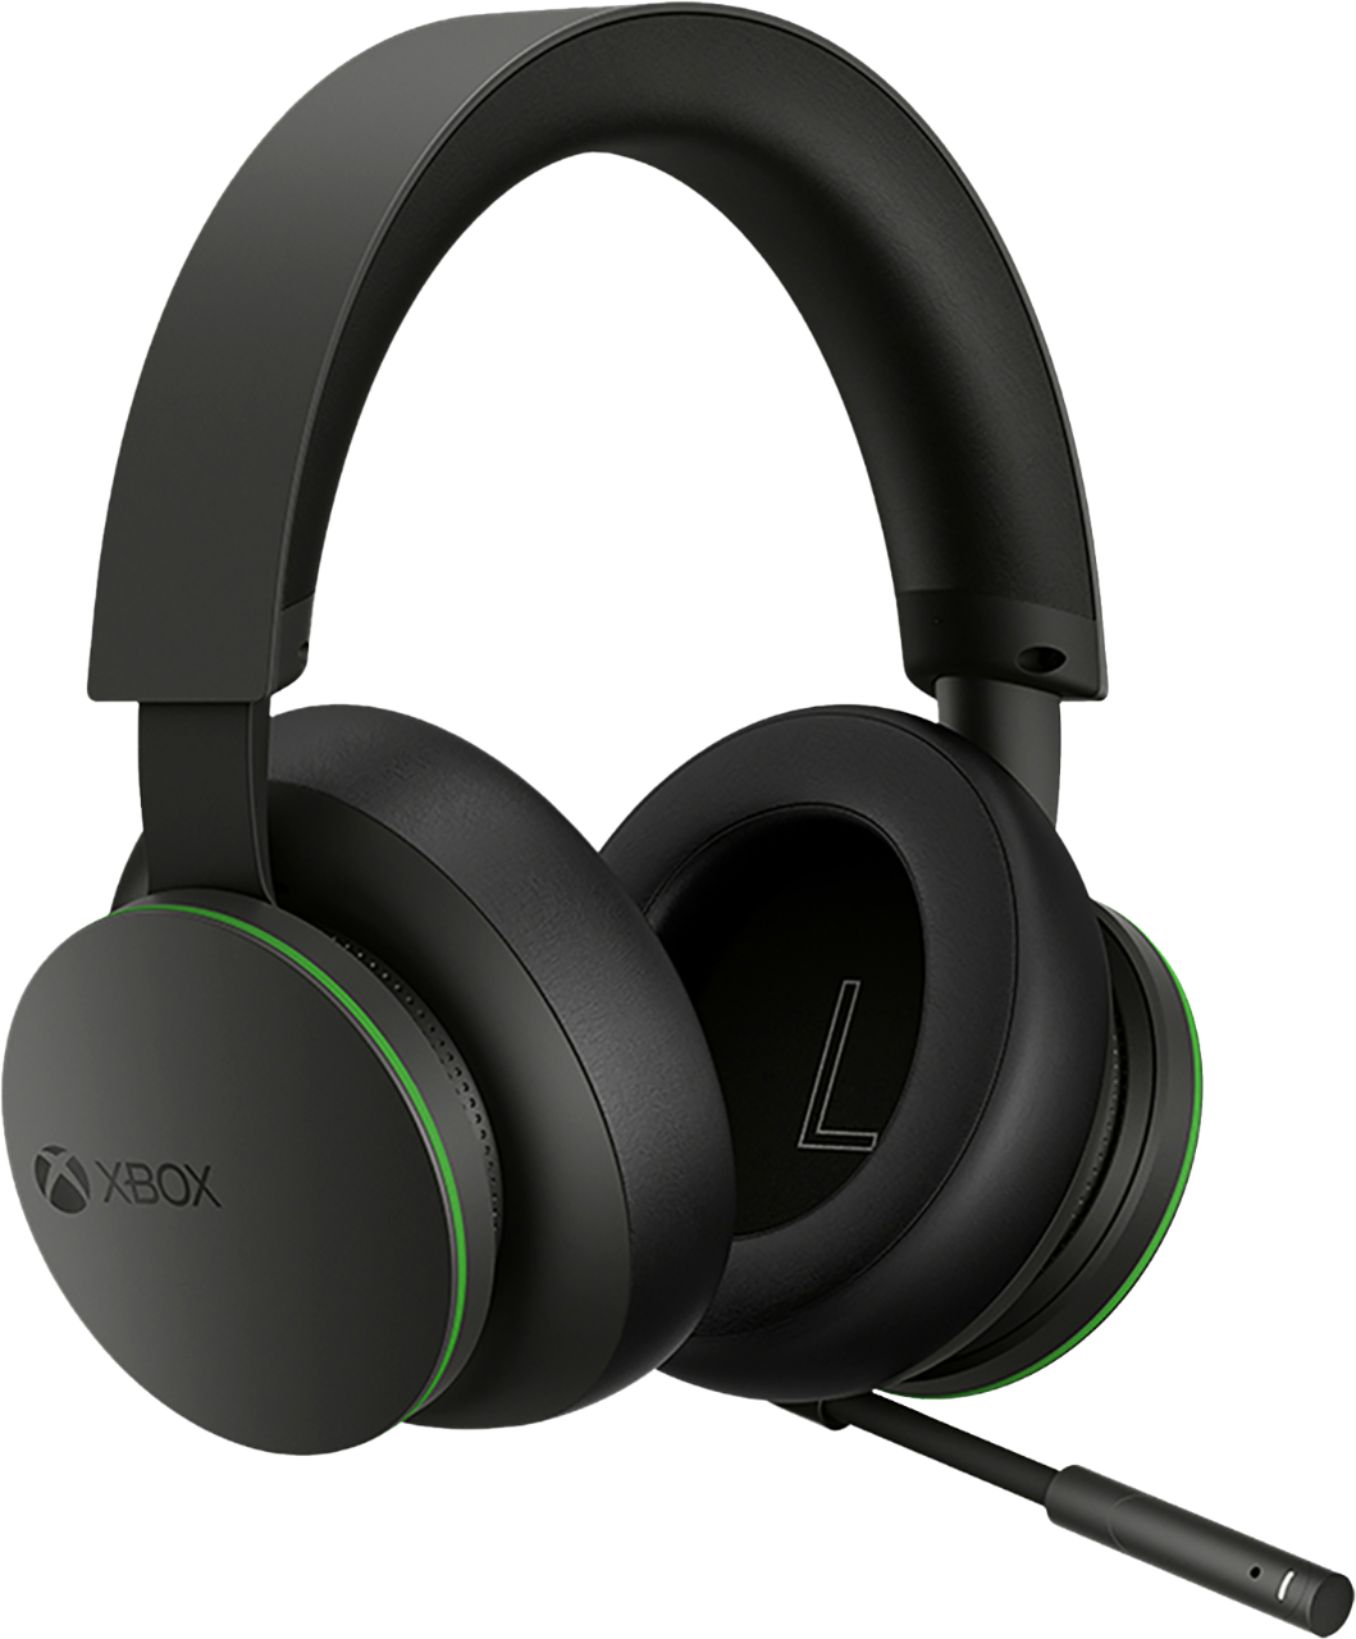 Microsoft Xbox Wireless Headset available for preorder on bb.com $99.99